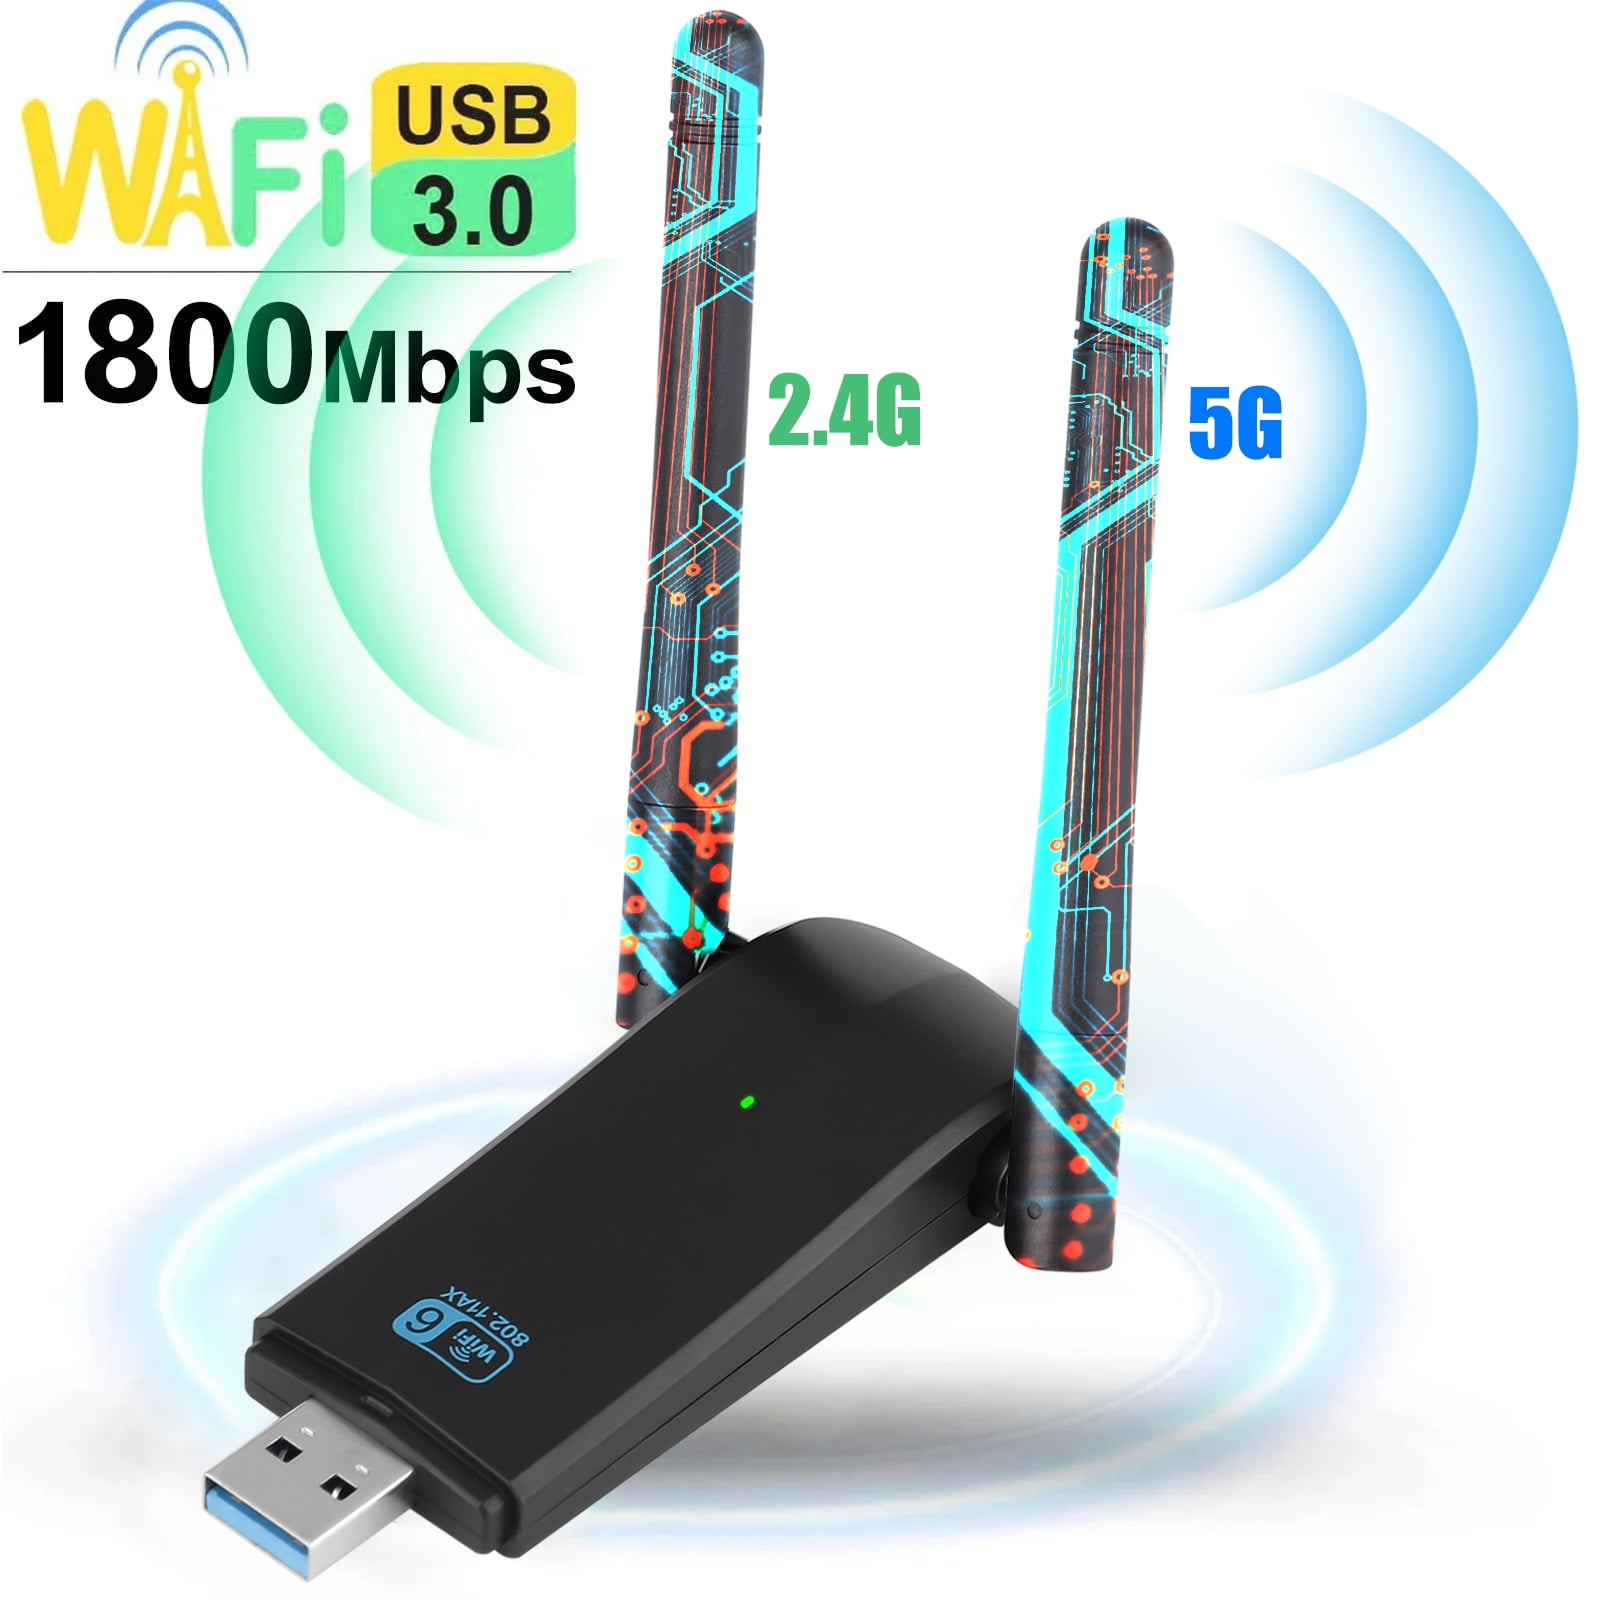 USB WiFi Adapter for PC, 1800Mbps Band Network Adapter, USB3.0 High Gain 802.11ac WiFi Dongle Wireless Adapter for Desktop Laptop Supports Windows 10/11 - Walmart.com